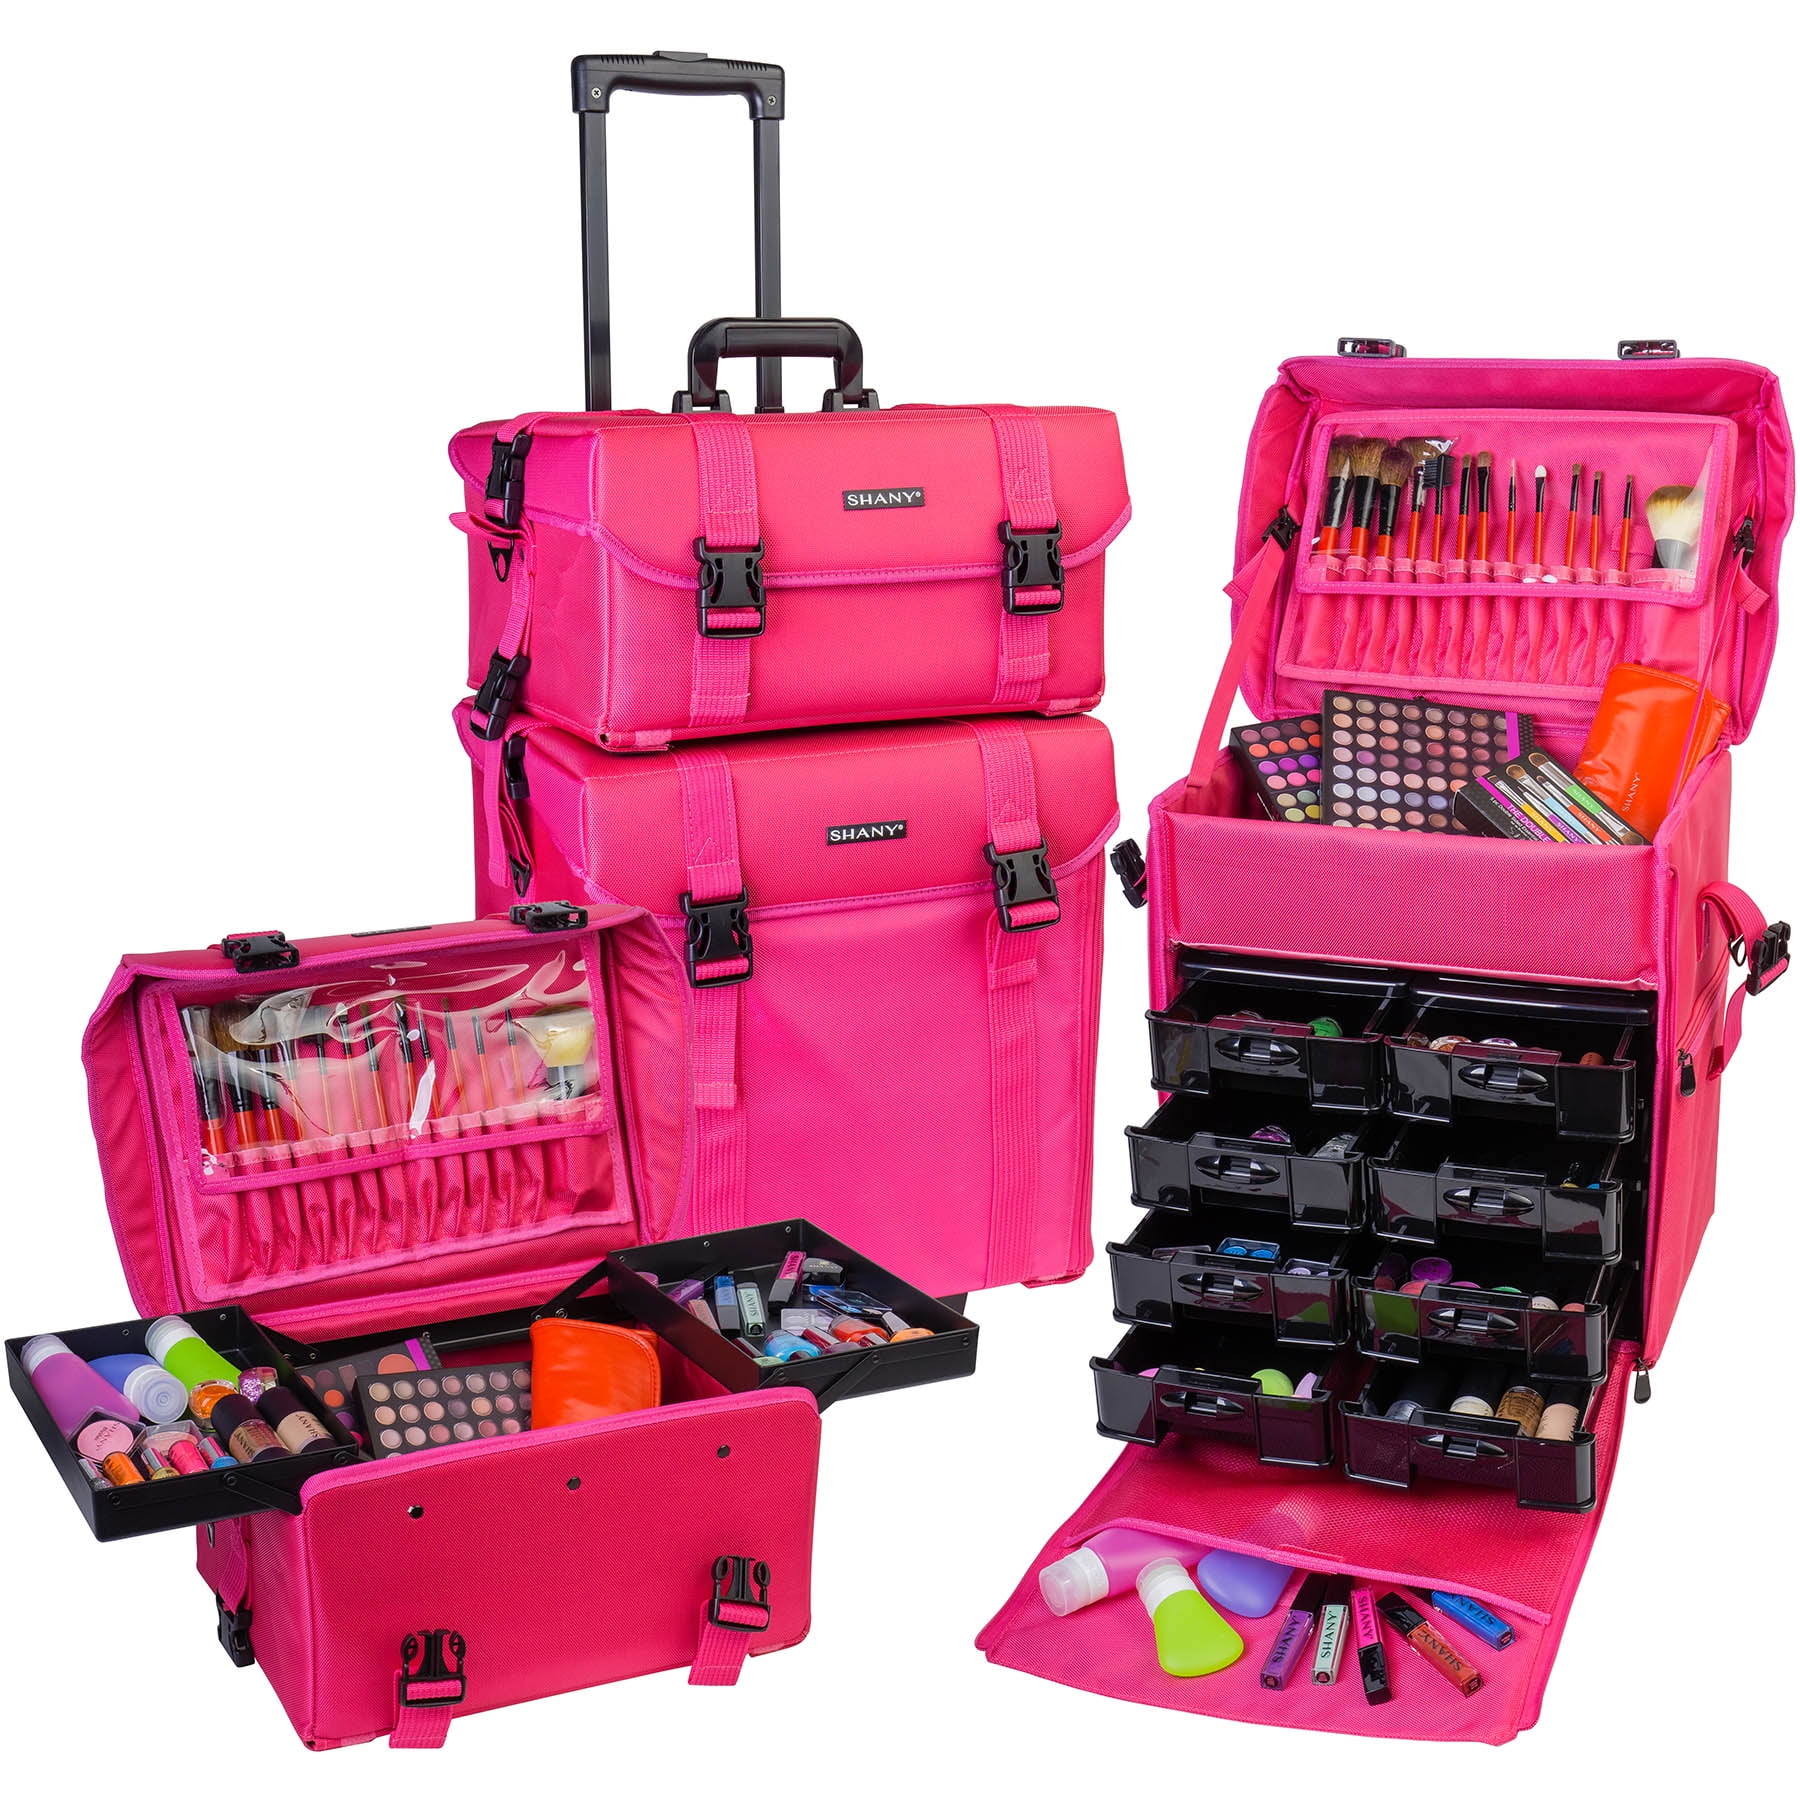 SHANY Soft Makeup Artist Rolling Trolley Cosmetic Case with Free